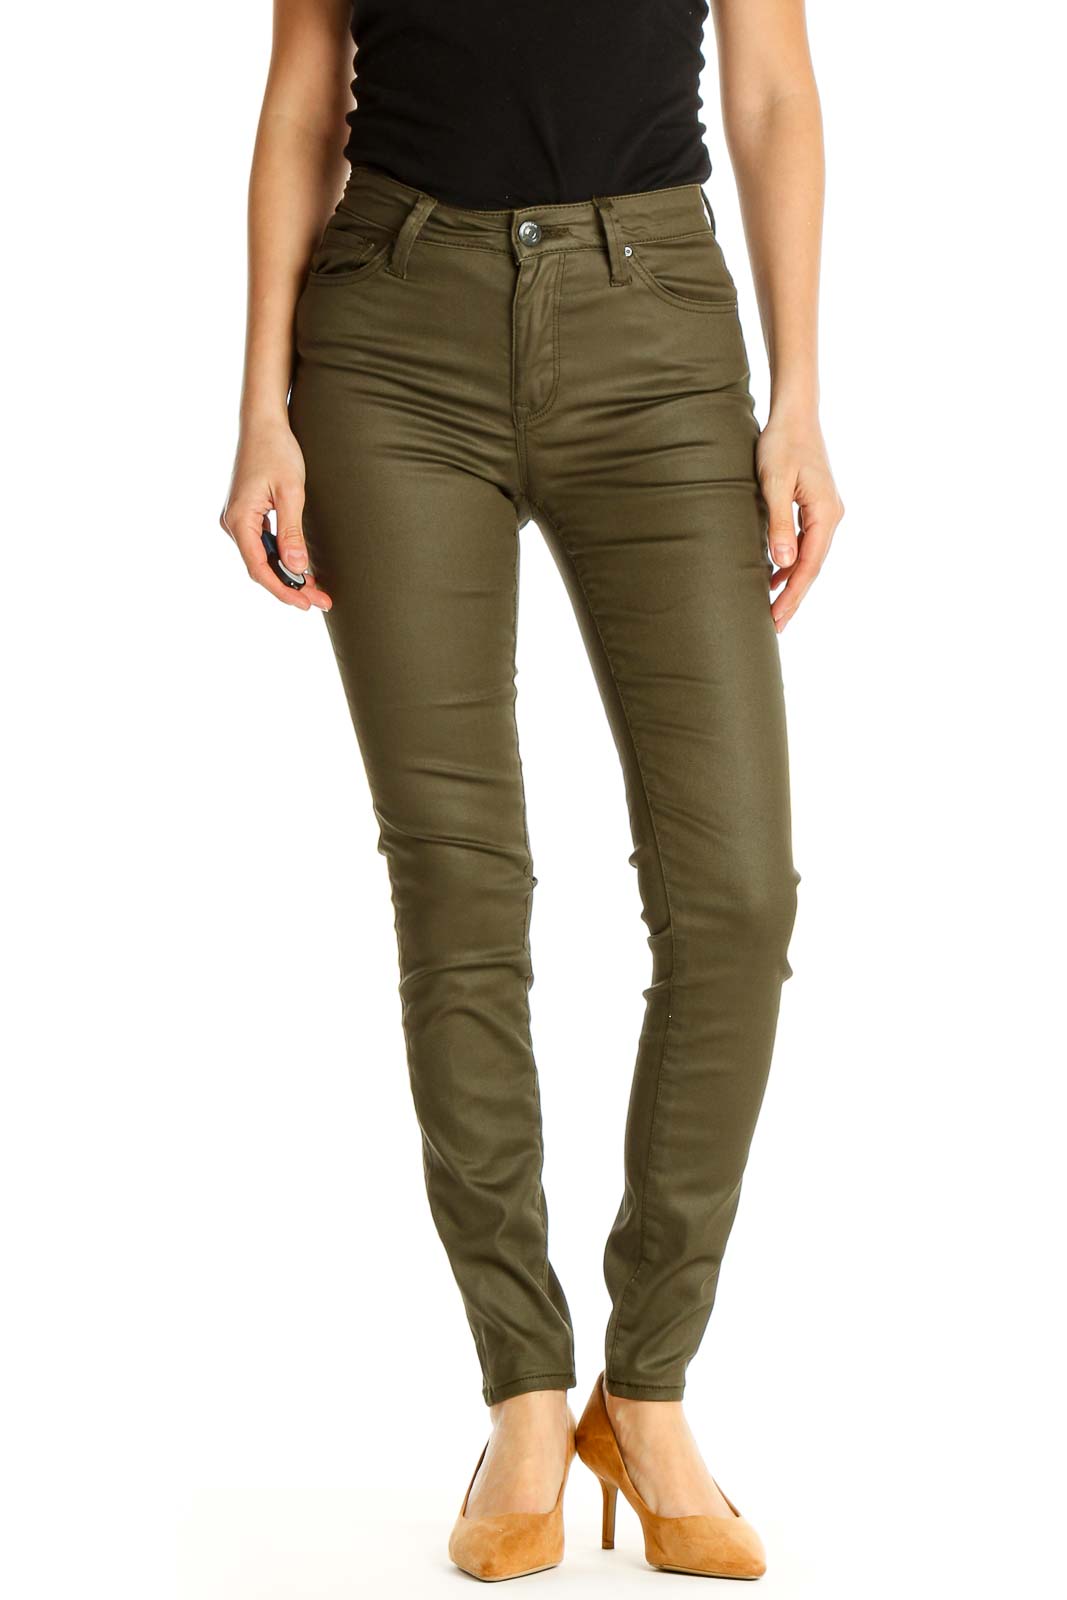 Green Skinny Jeans Front